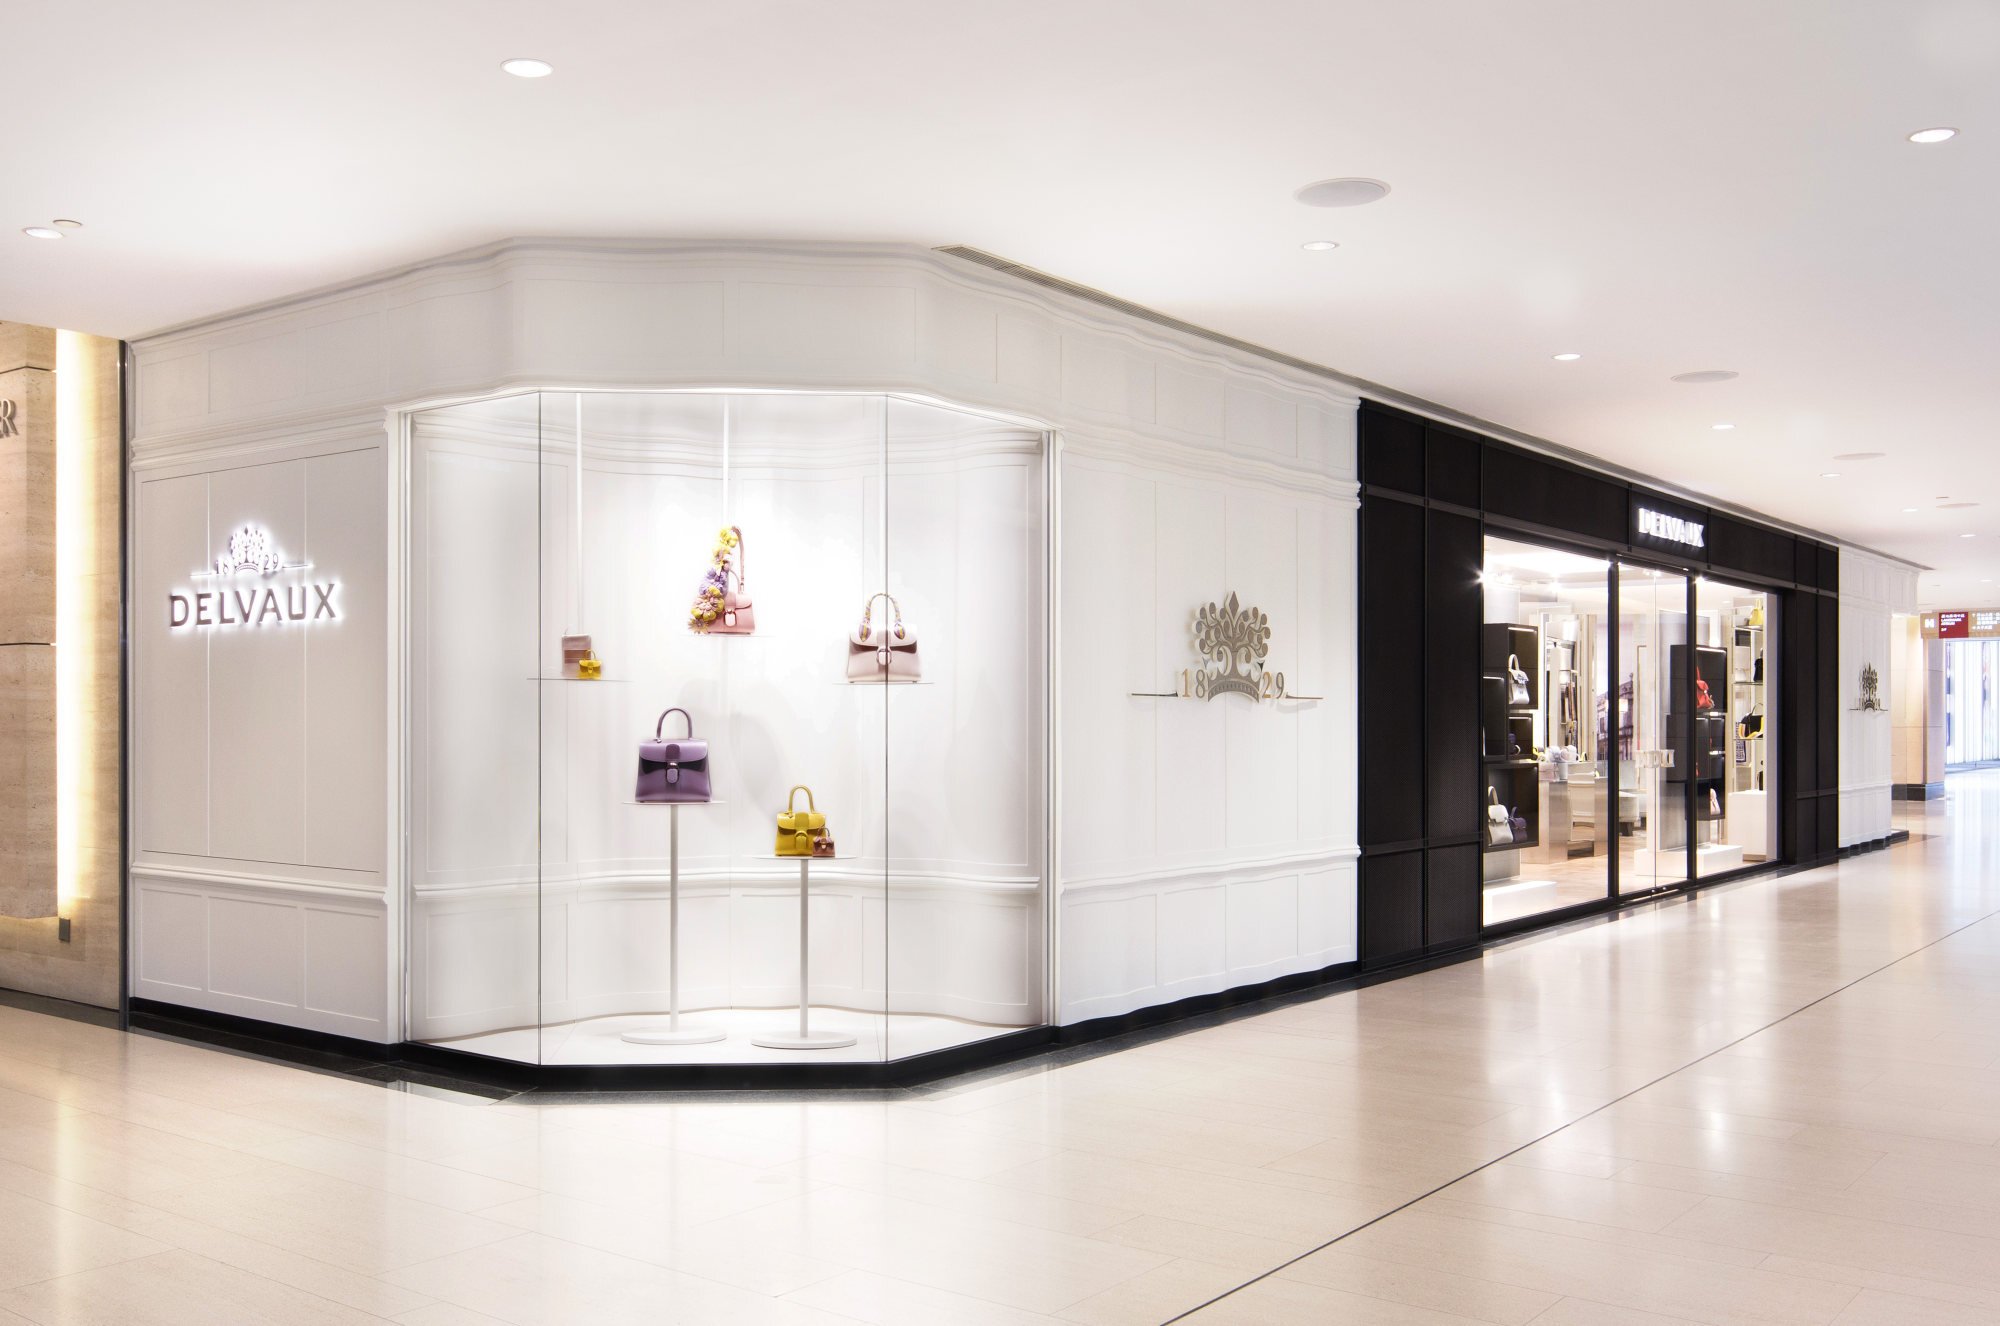 Switzerland's Richemont acquires leather goods company Delvaux